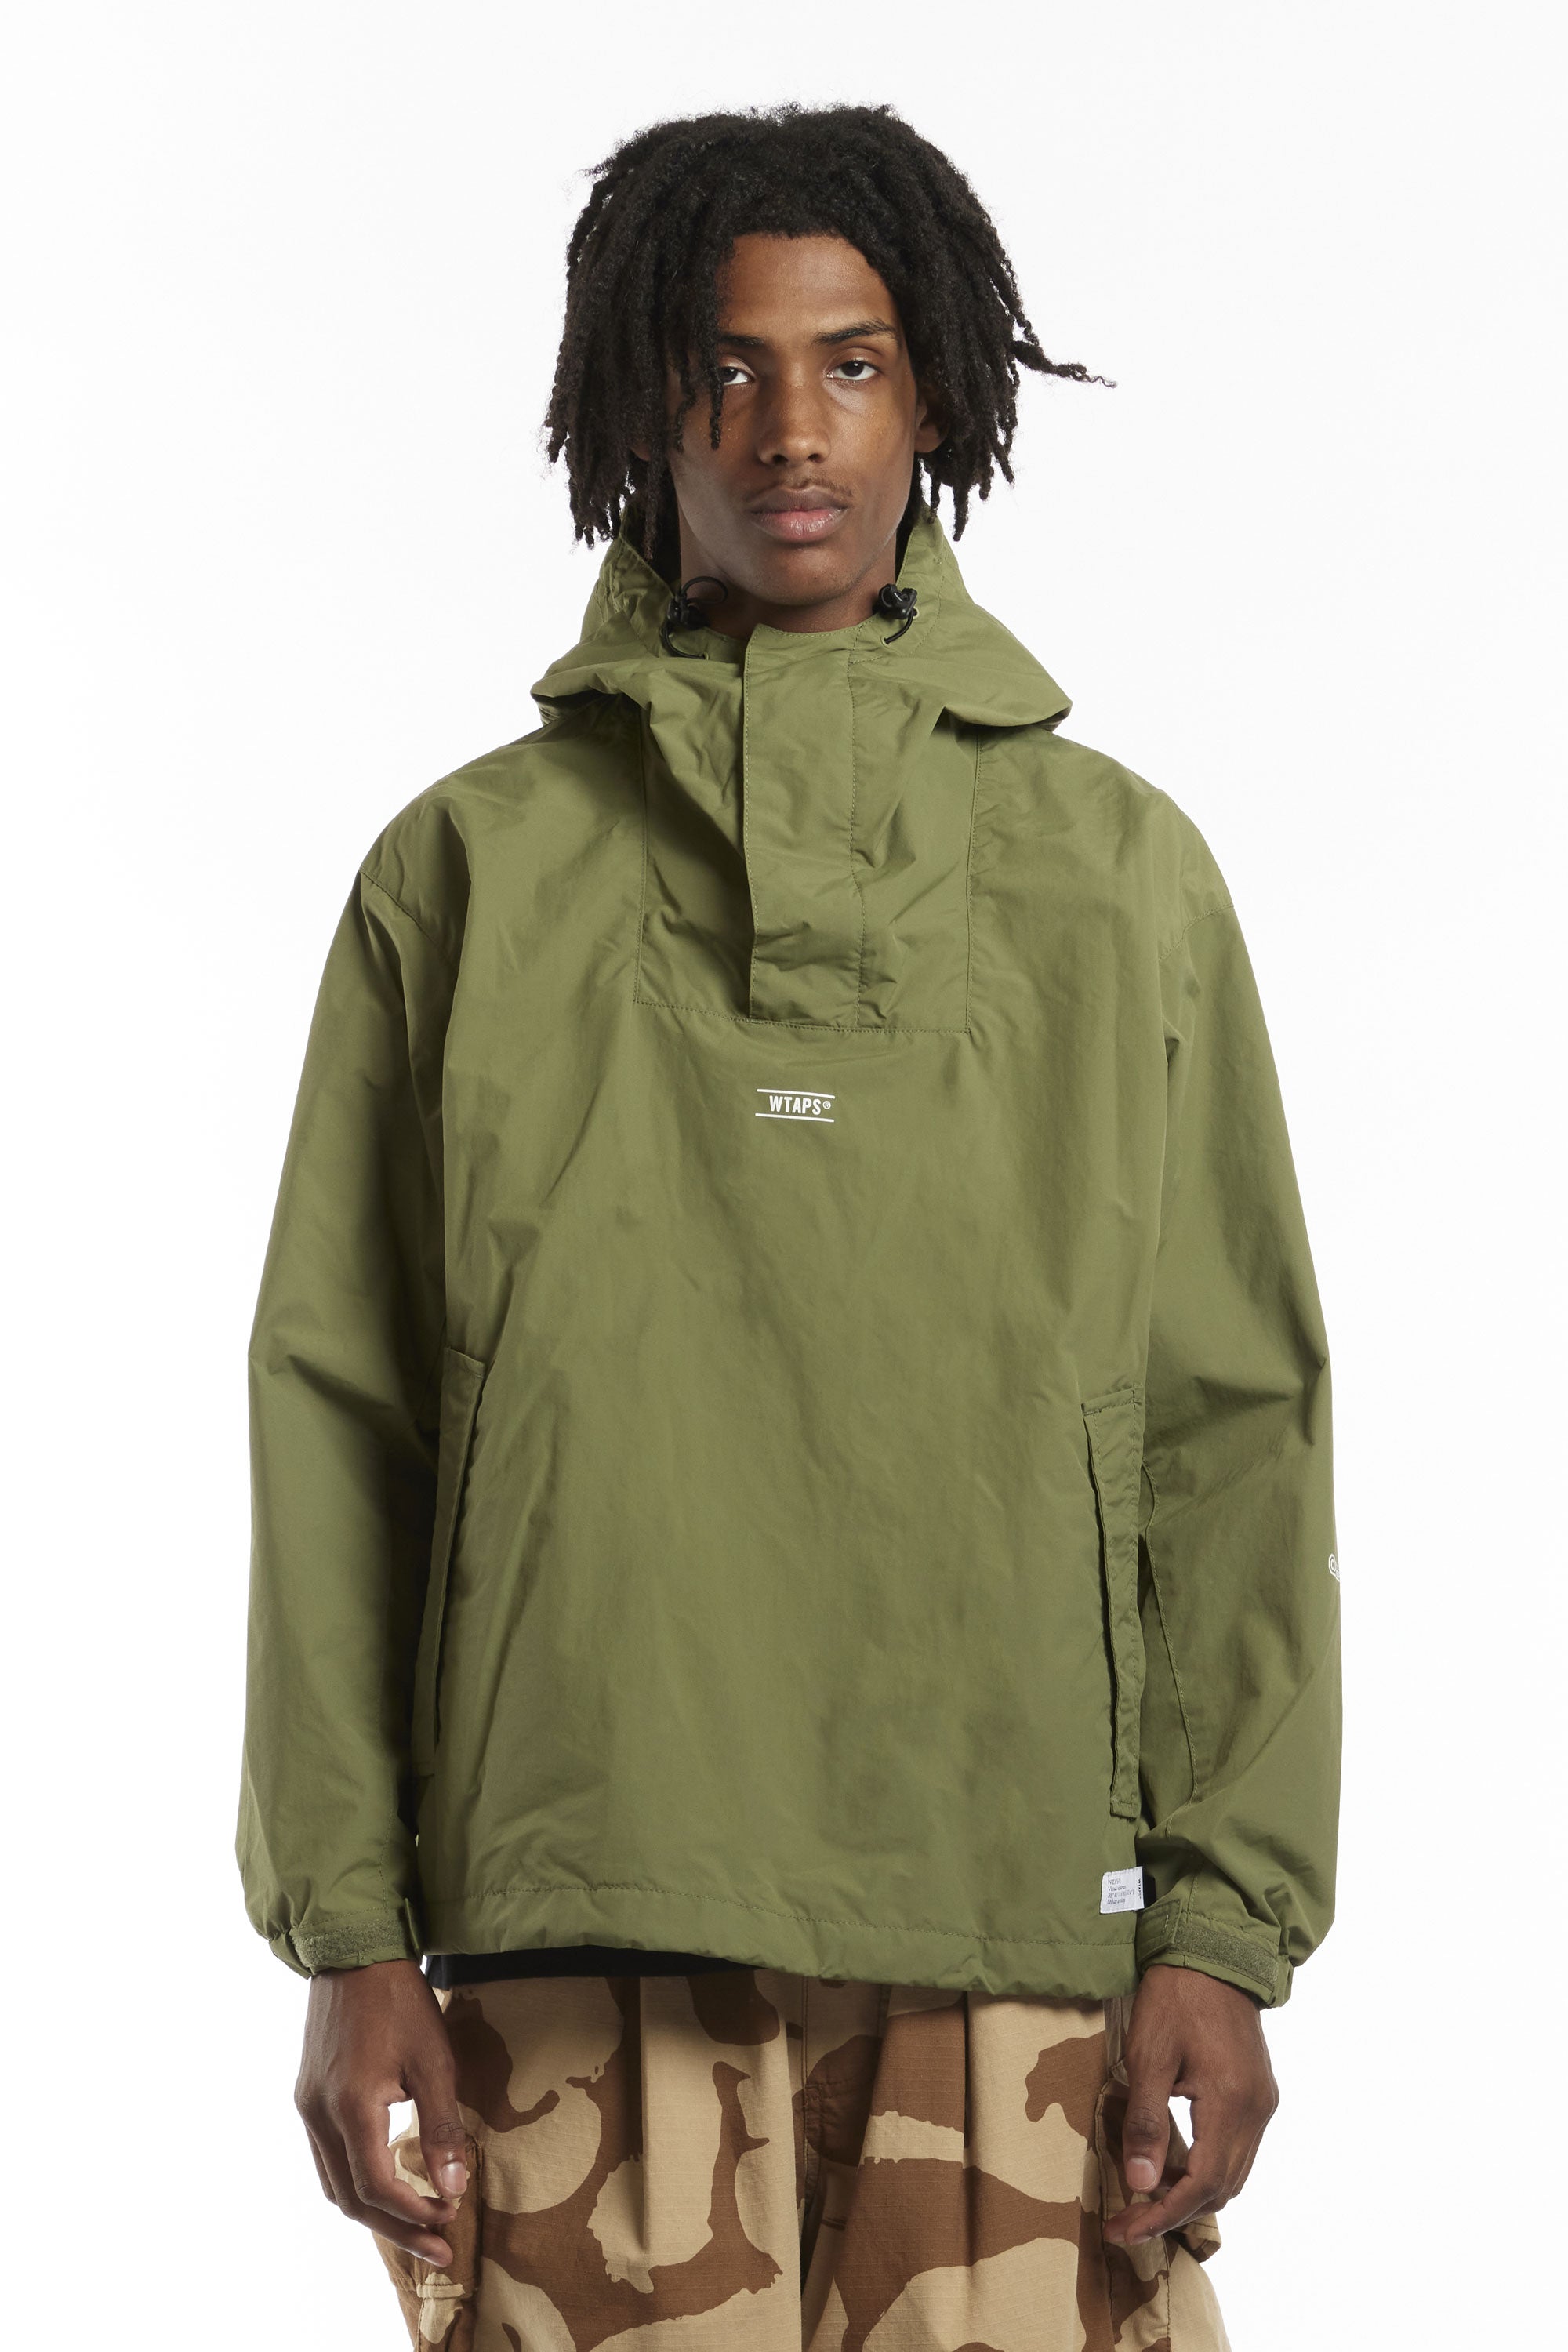 The WTAPS - SBS BRACKETS JACKET OLIVE DRAB available online with global shipping, and in PAM Stores Melbourne and Sydney.